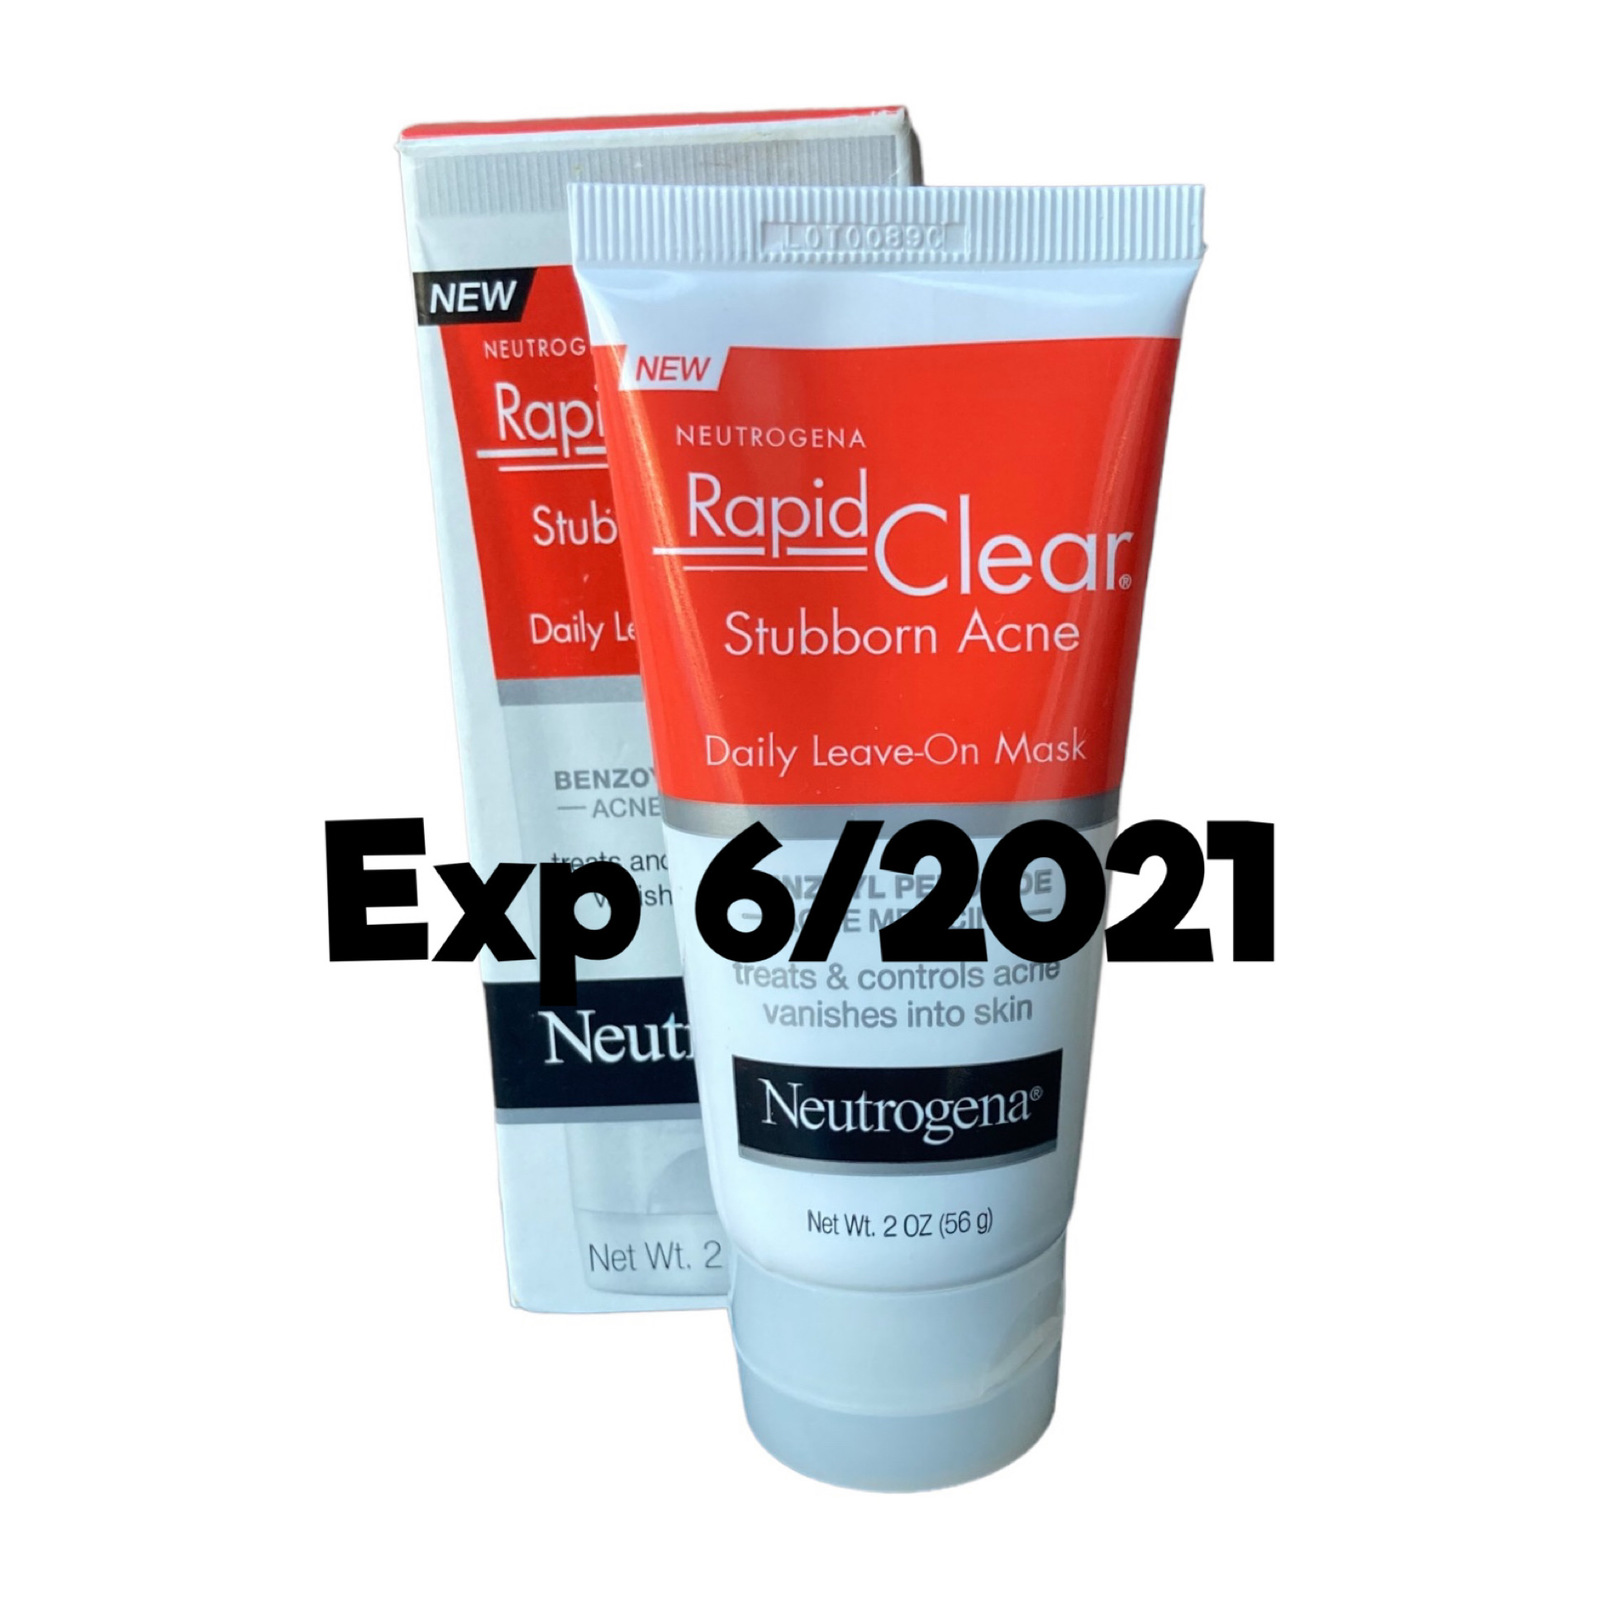 Neutrogena Rapid Clear Daily Leave-on Mask - $22.00